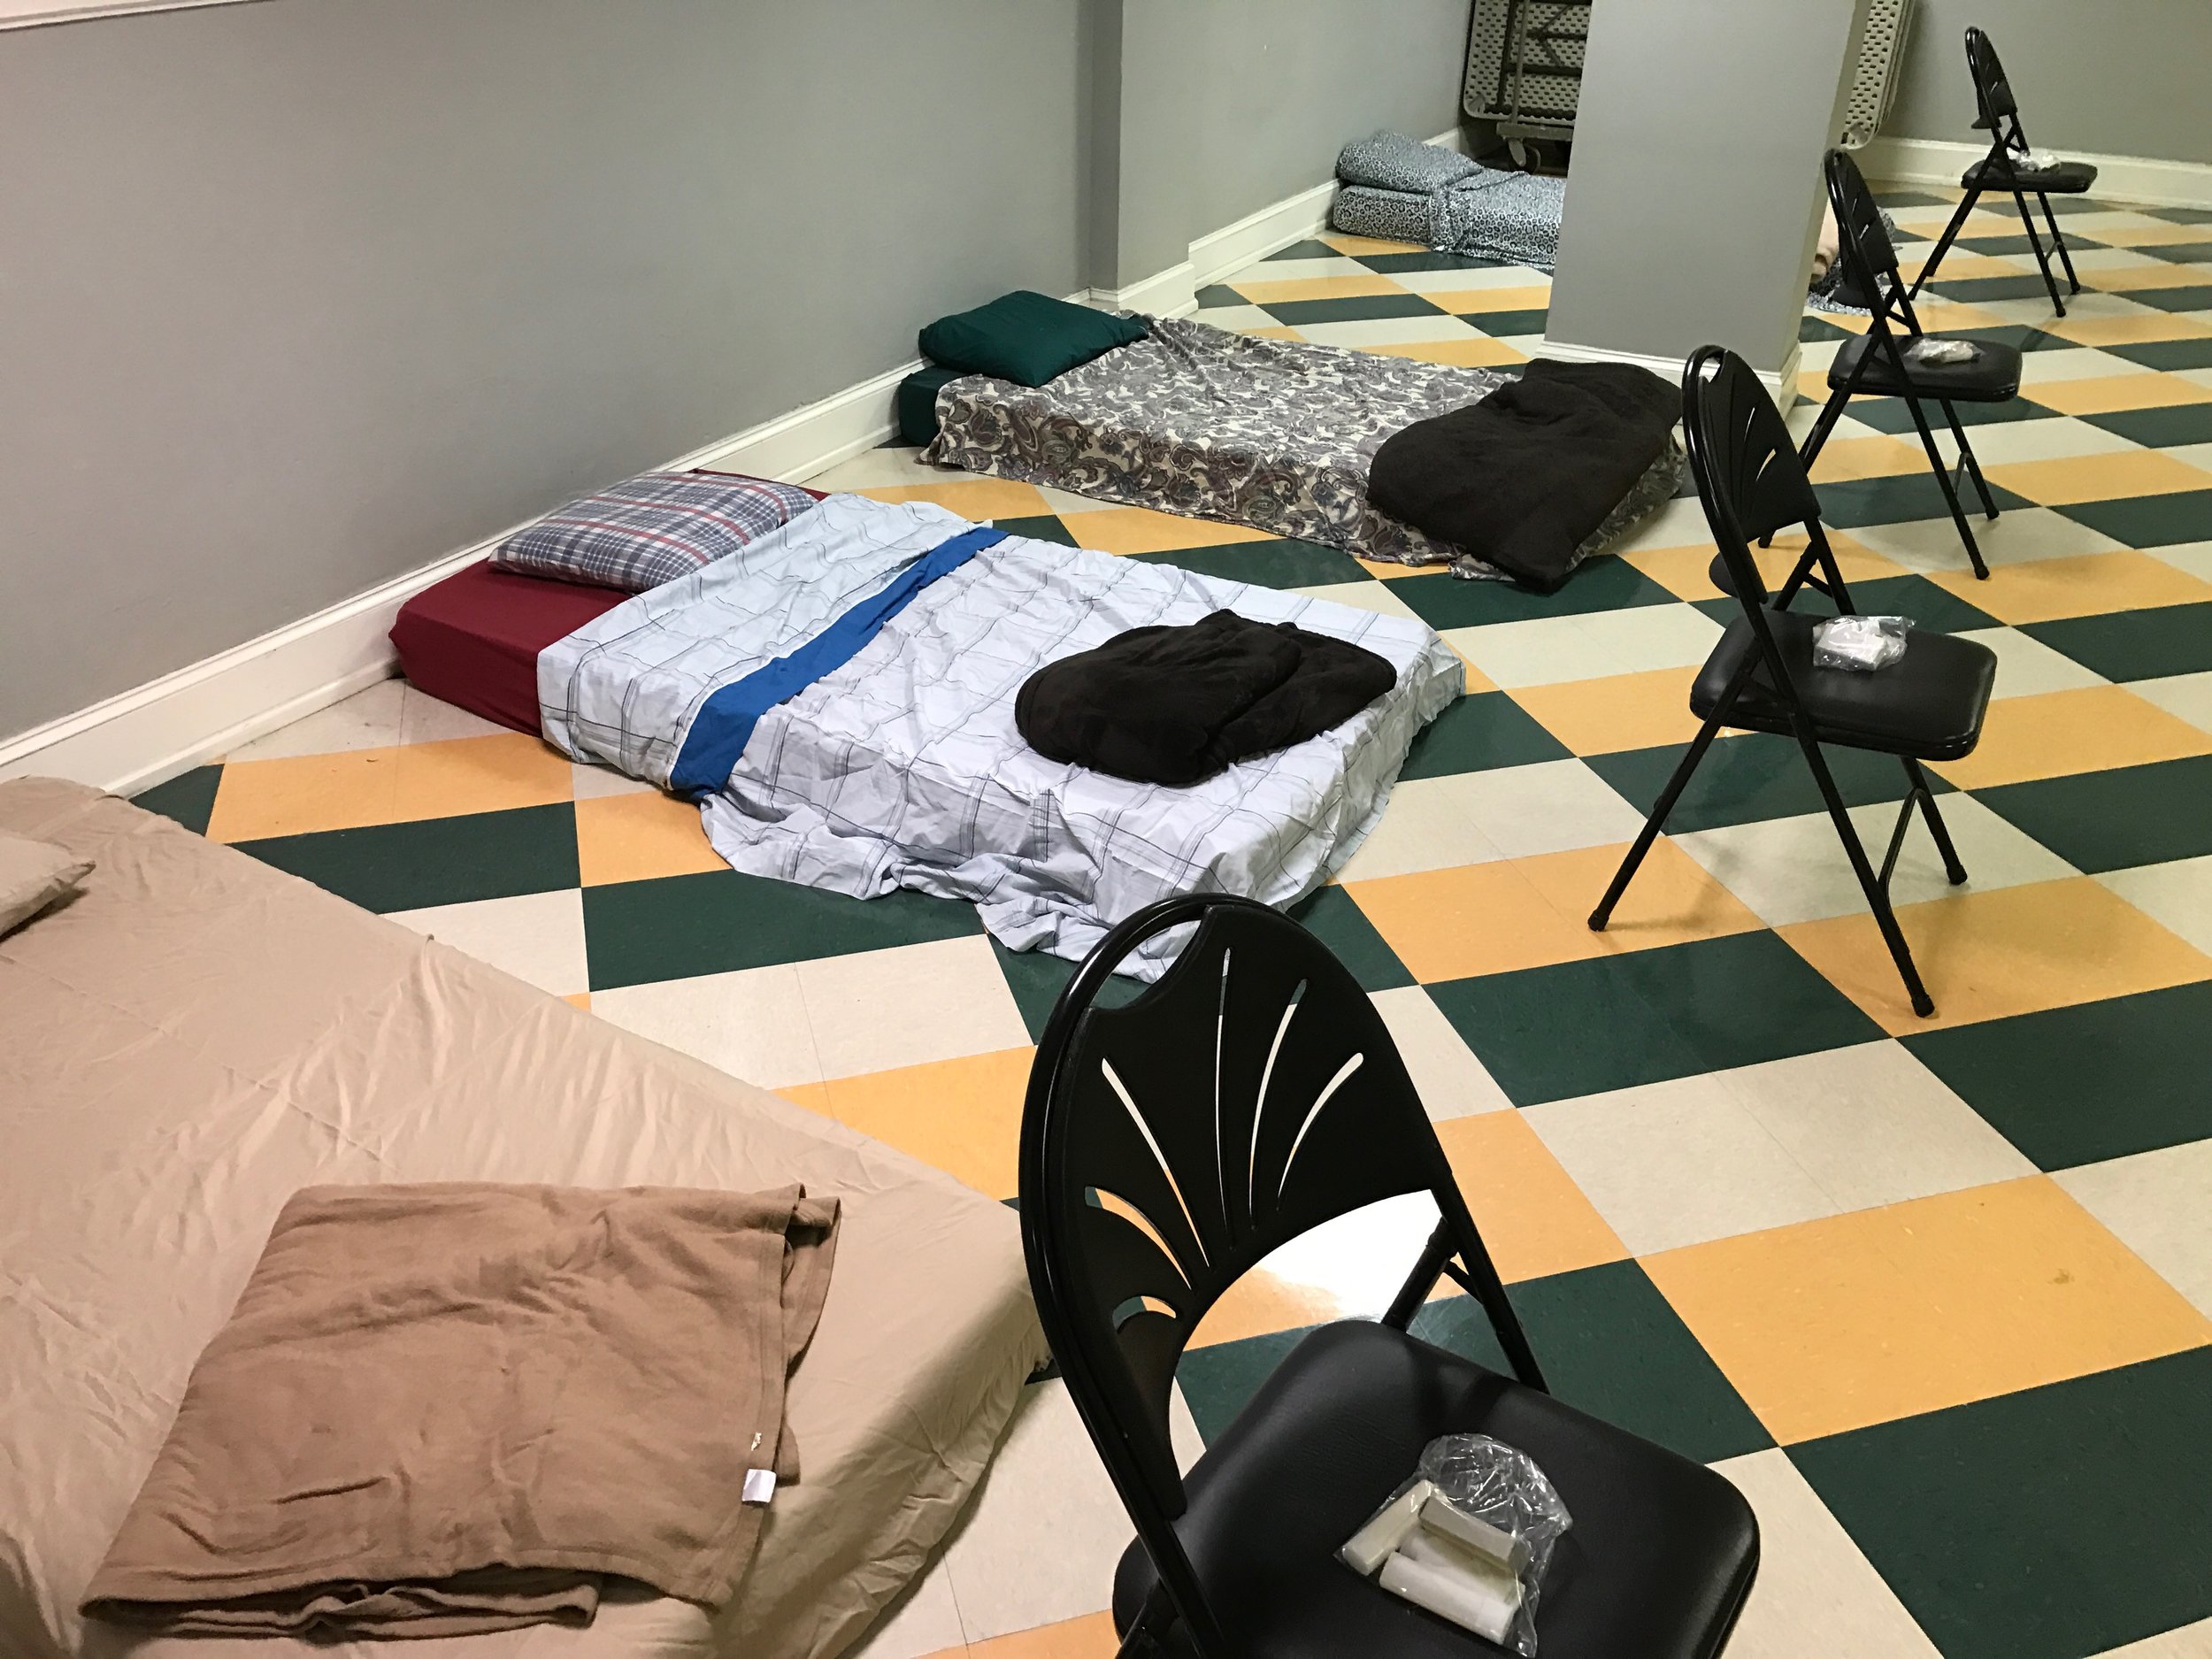   Room In The Inn gives shelter during the winter months for our neighbors without homes.  